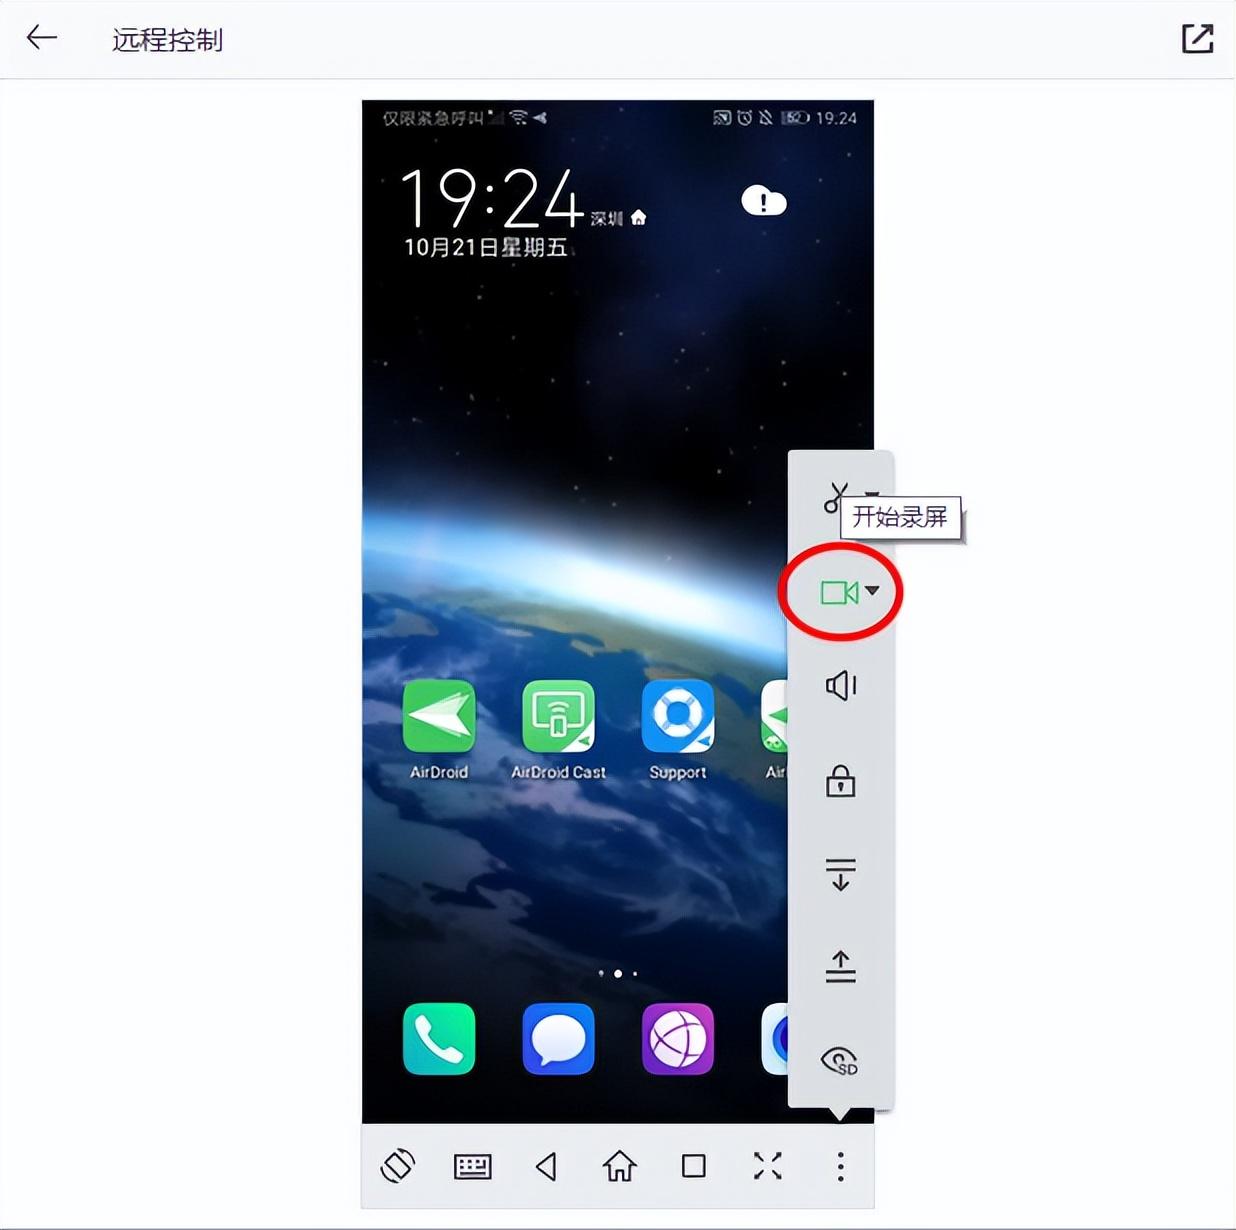 android 录制视频 surface插图新简